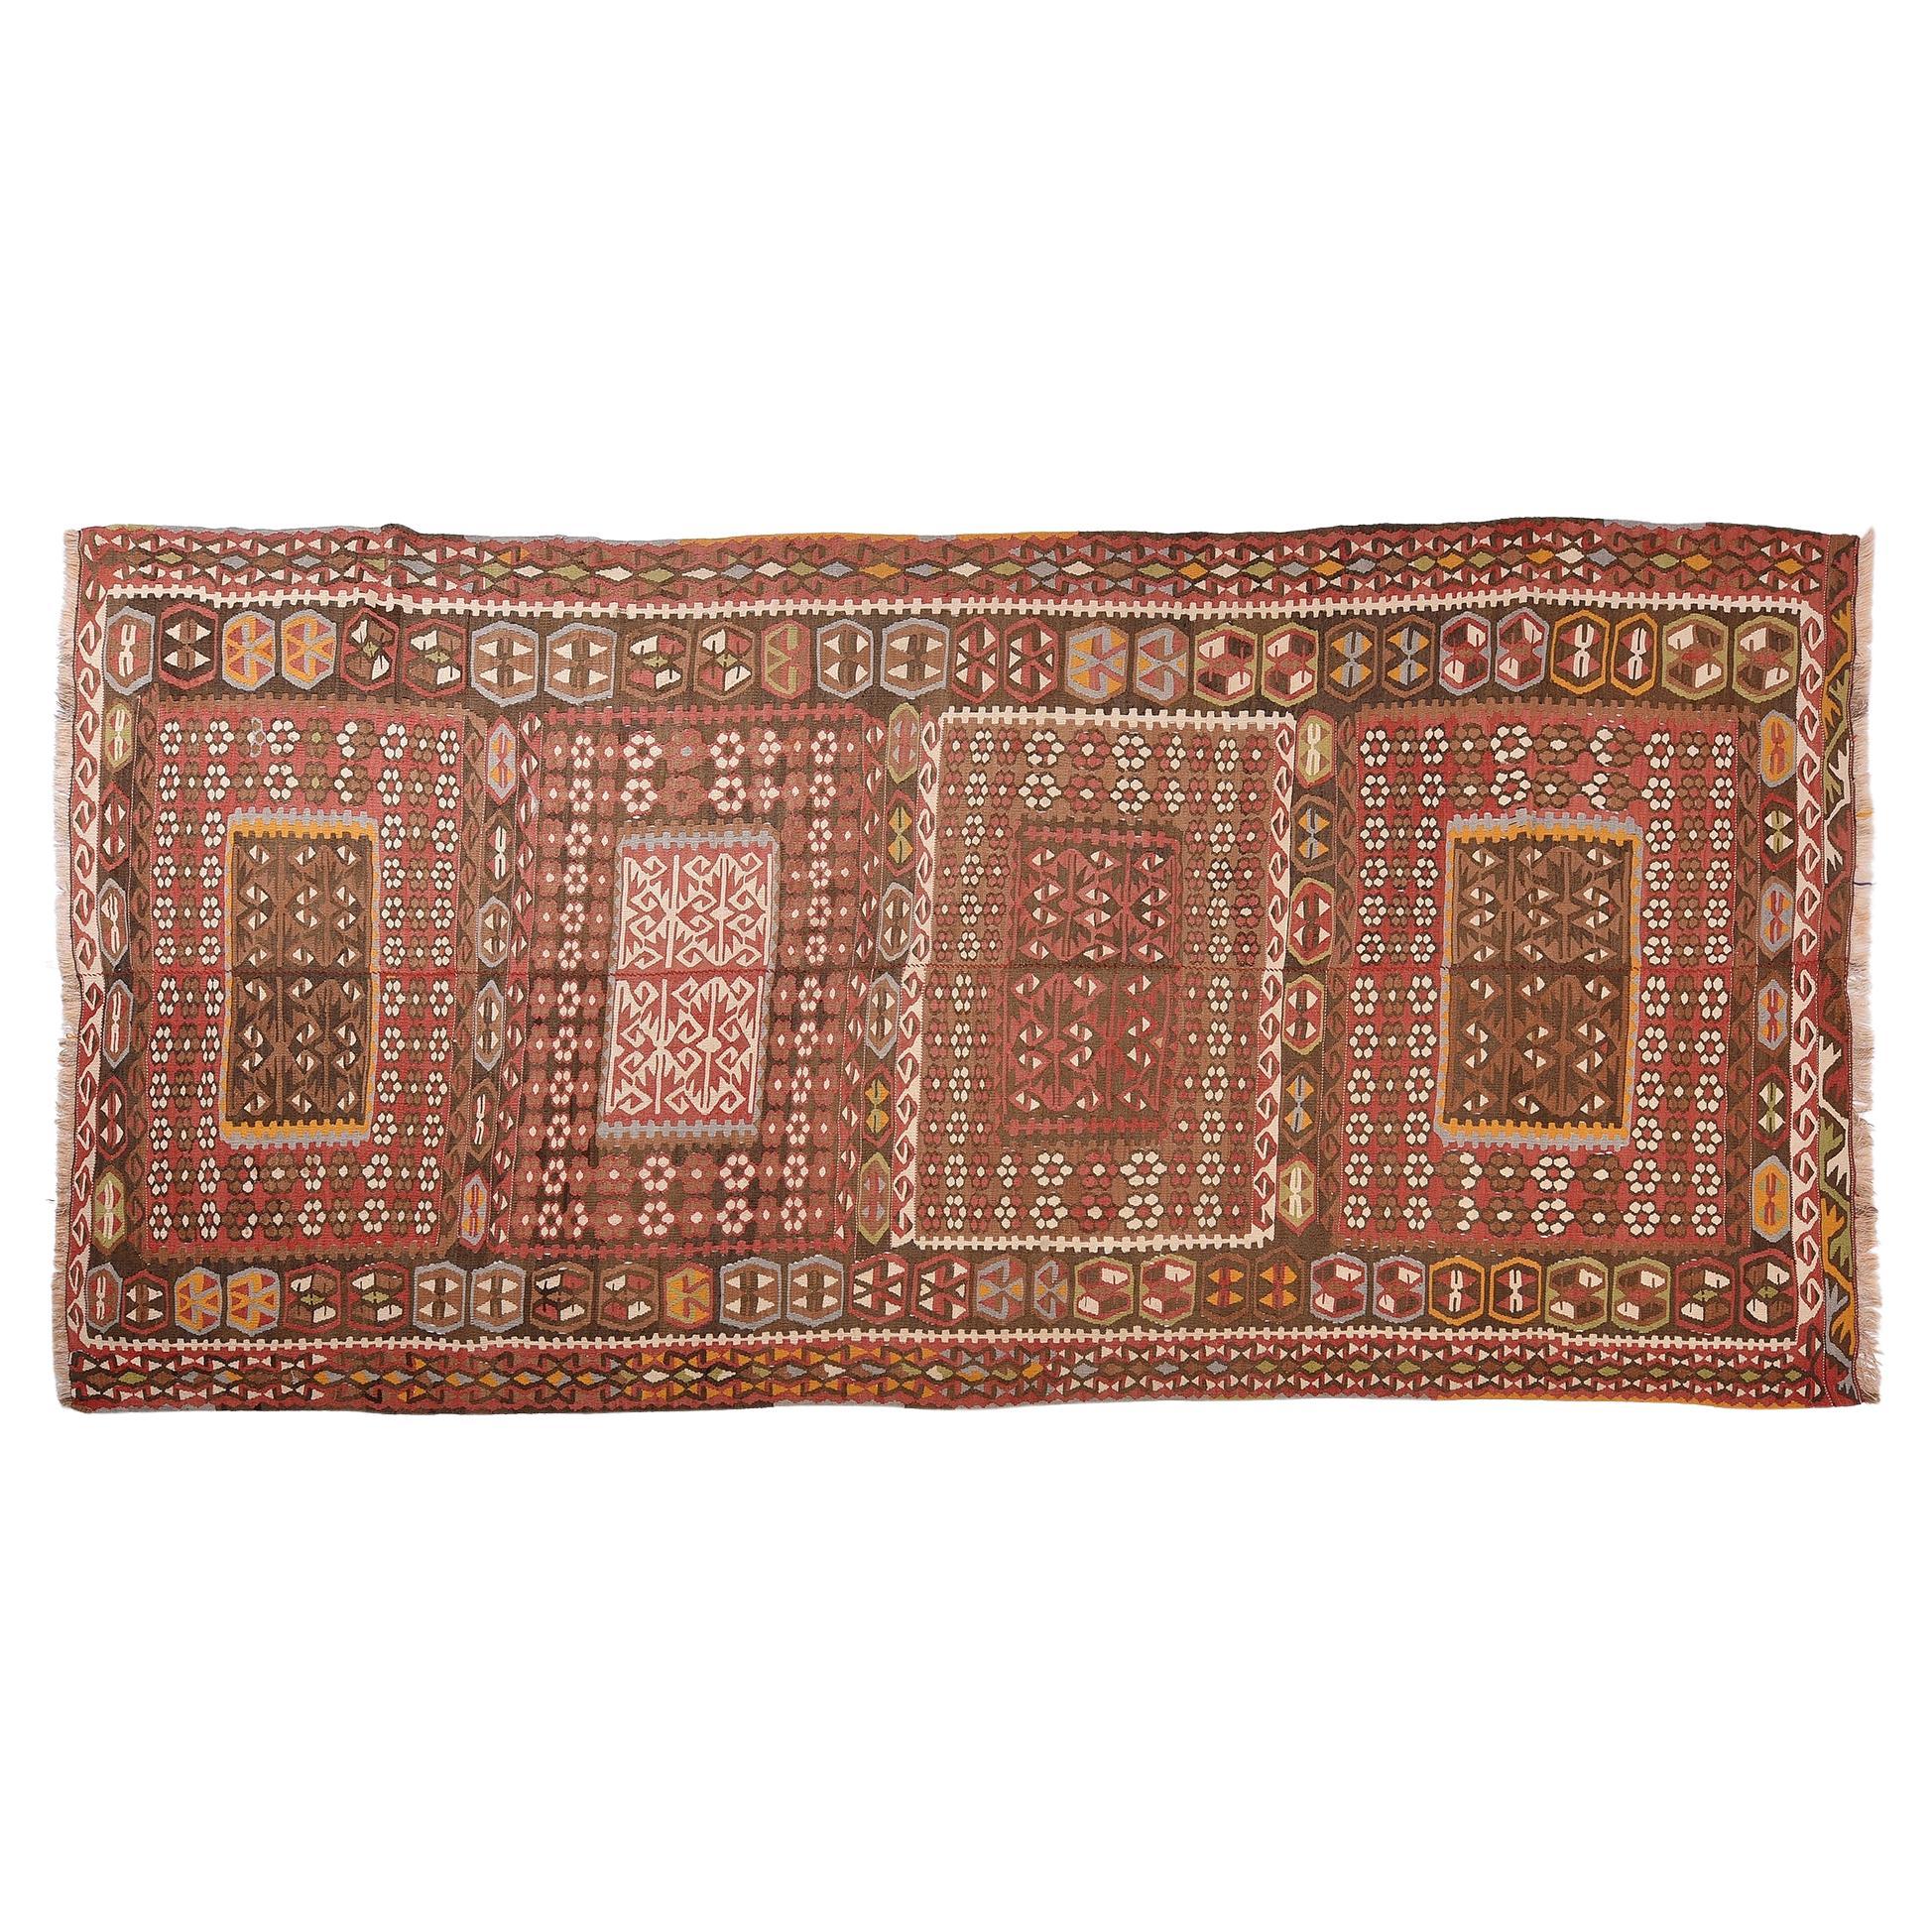 nr. 935 - Large old Turkish kilim, composed of two partes sewn in the center: typical nomadic workmanship.
Light brick colors (for the blinding sun) with grey, white, and small saffron details to embelish it. 
Now with a good price for closing